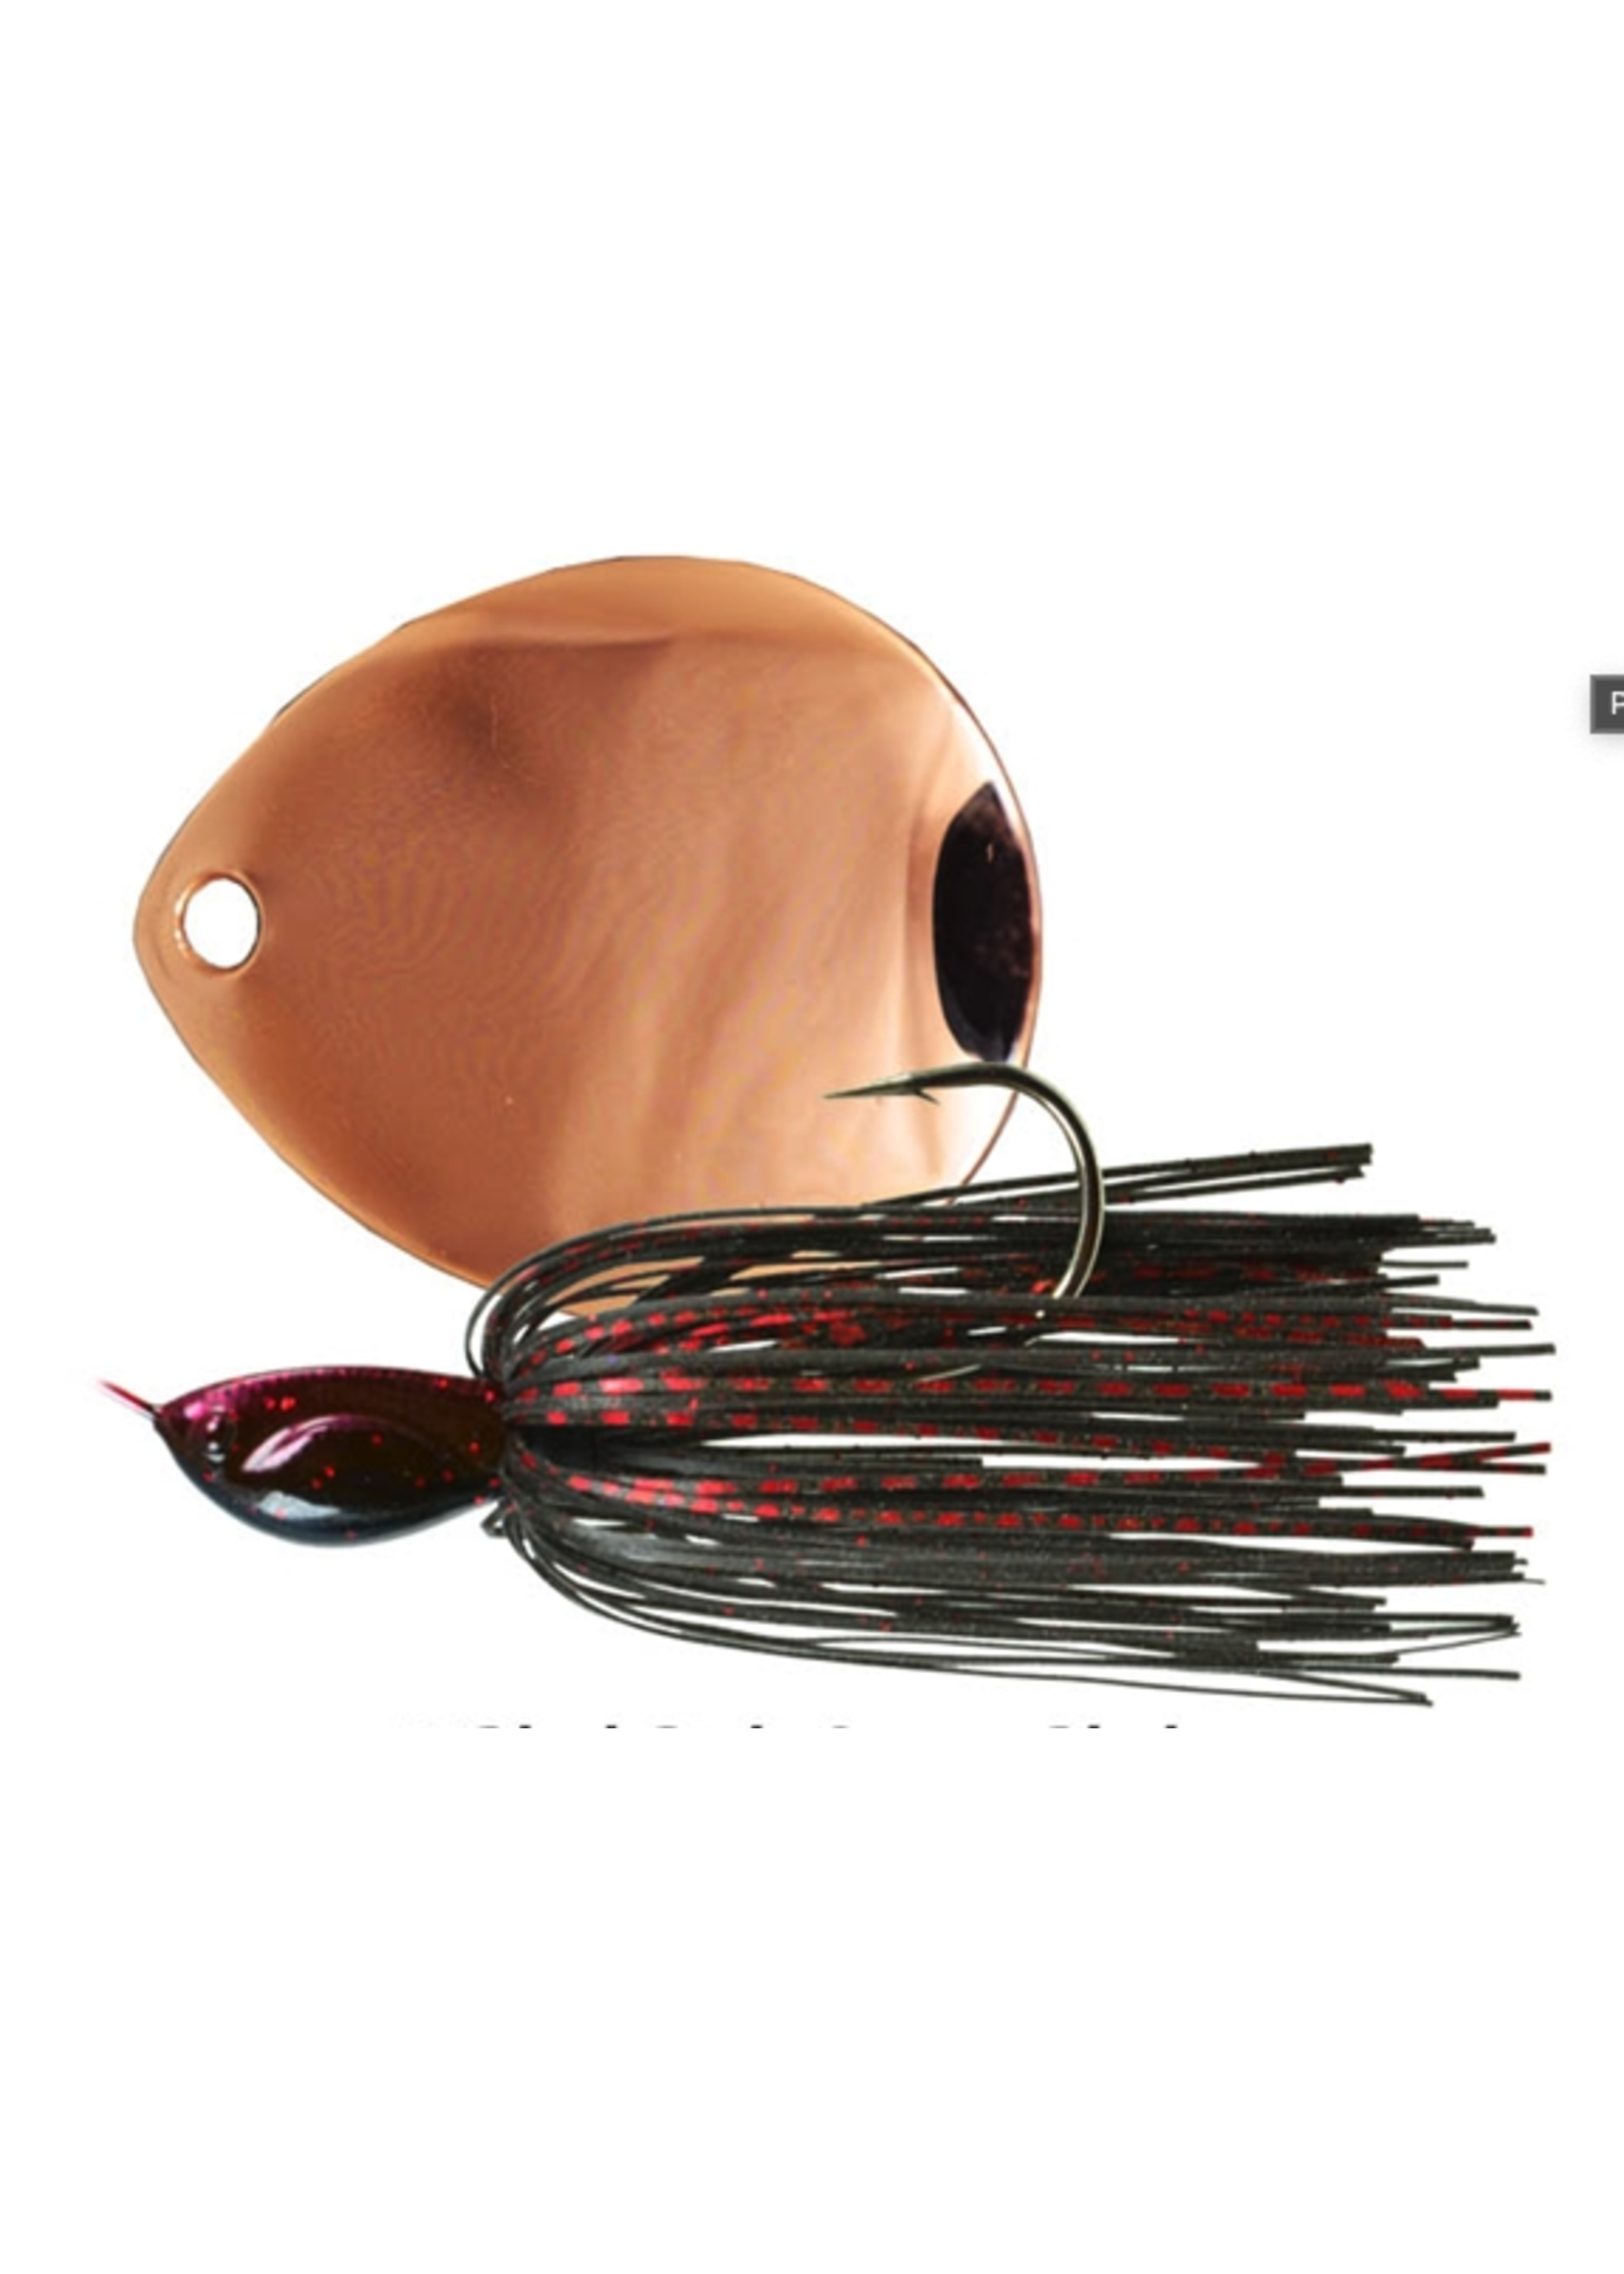 Picasso Lures Spinnerbait Single Colorado-Copper Blade Night Thumper